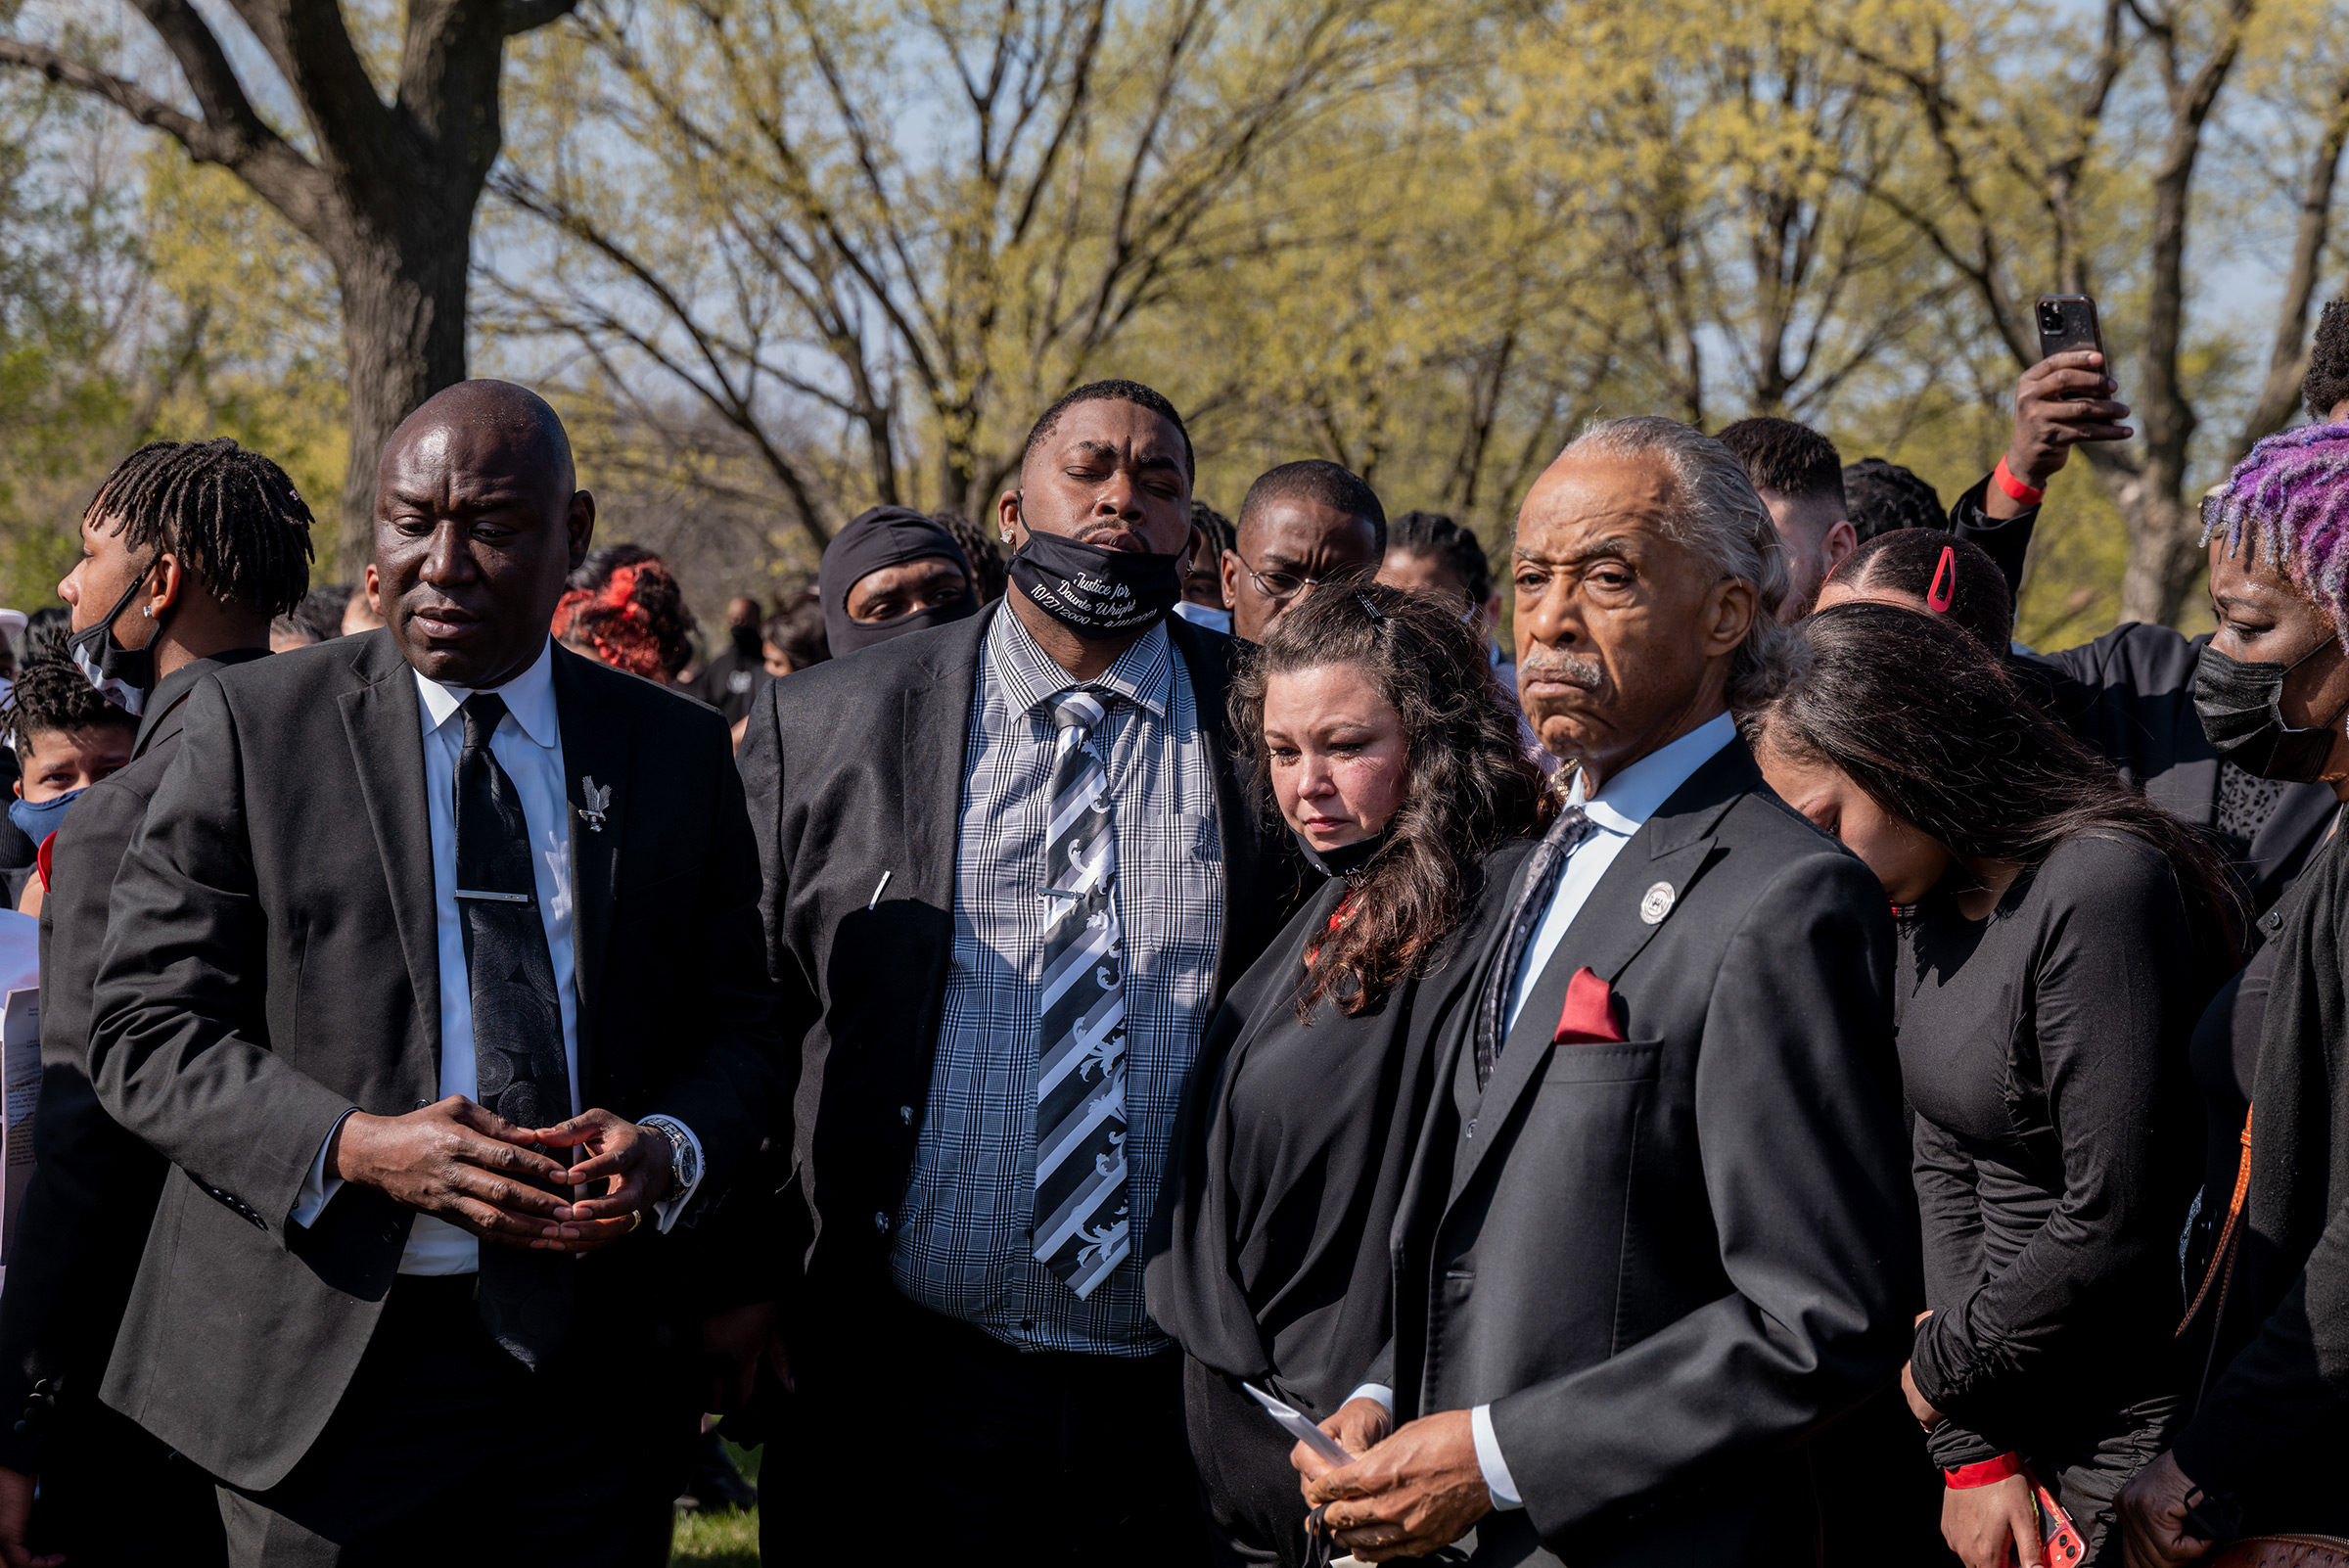 Aubrey and Katie Wright, the parents of Daunte Wright, stand with Crump (far left) and Sharpton (far right), at Lakewood Cemetery after their son's funeral in Minneapolis on April 22.